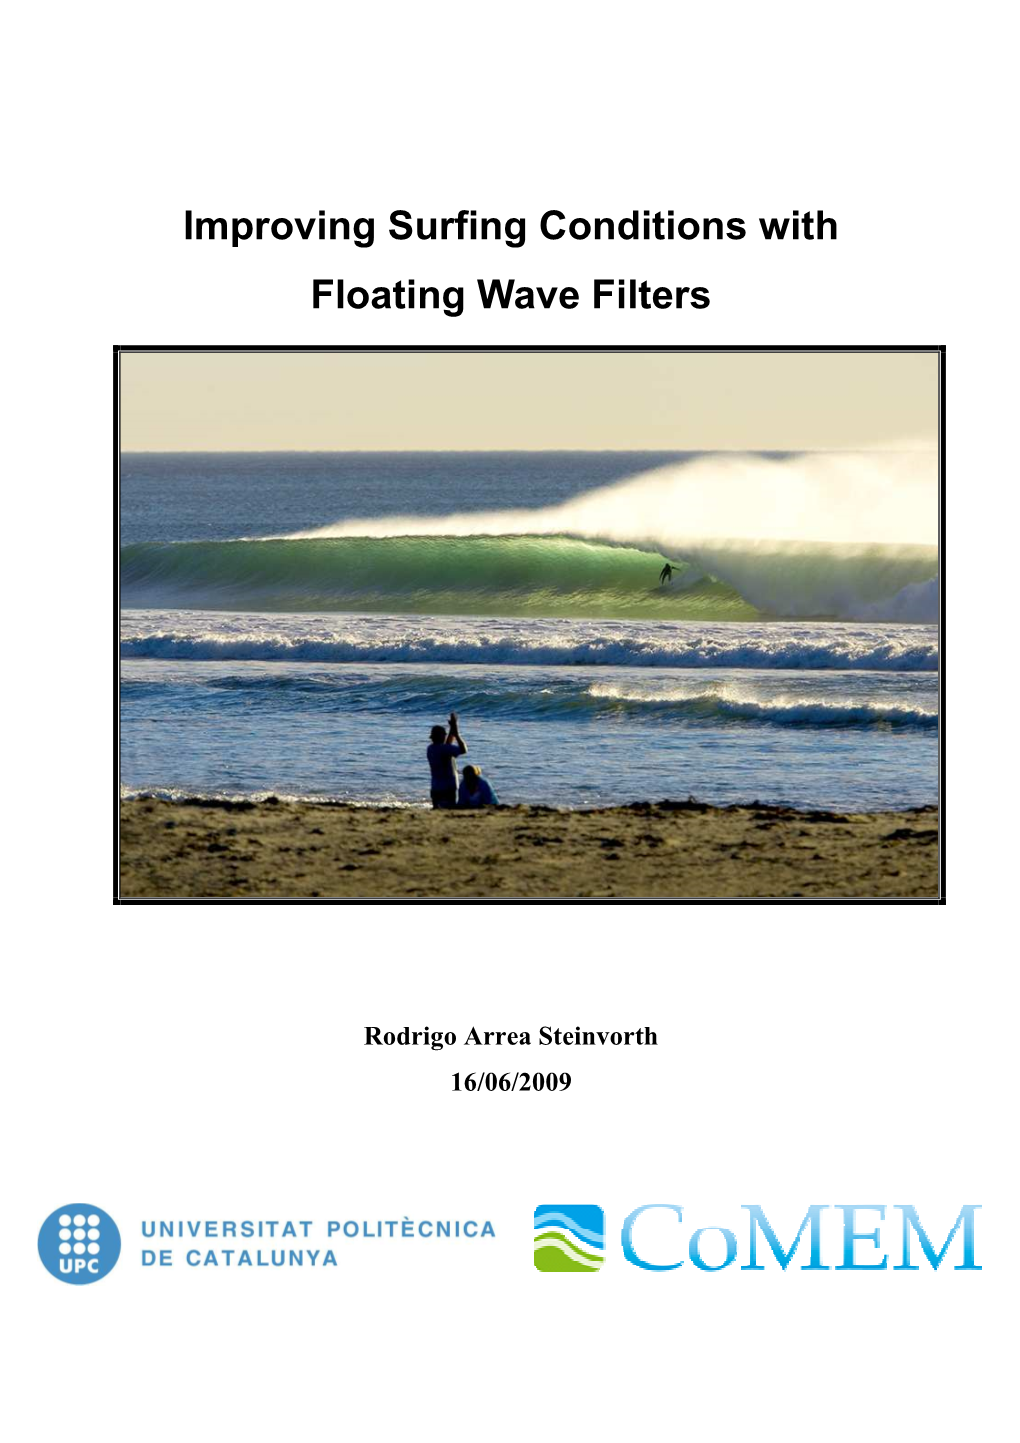 Improving Surfing Conditions with Floating Wave Filters